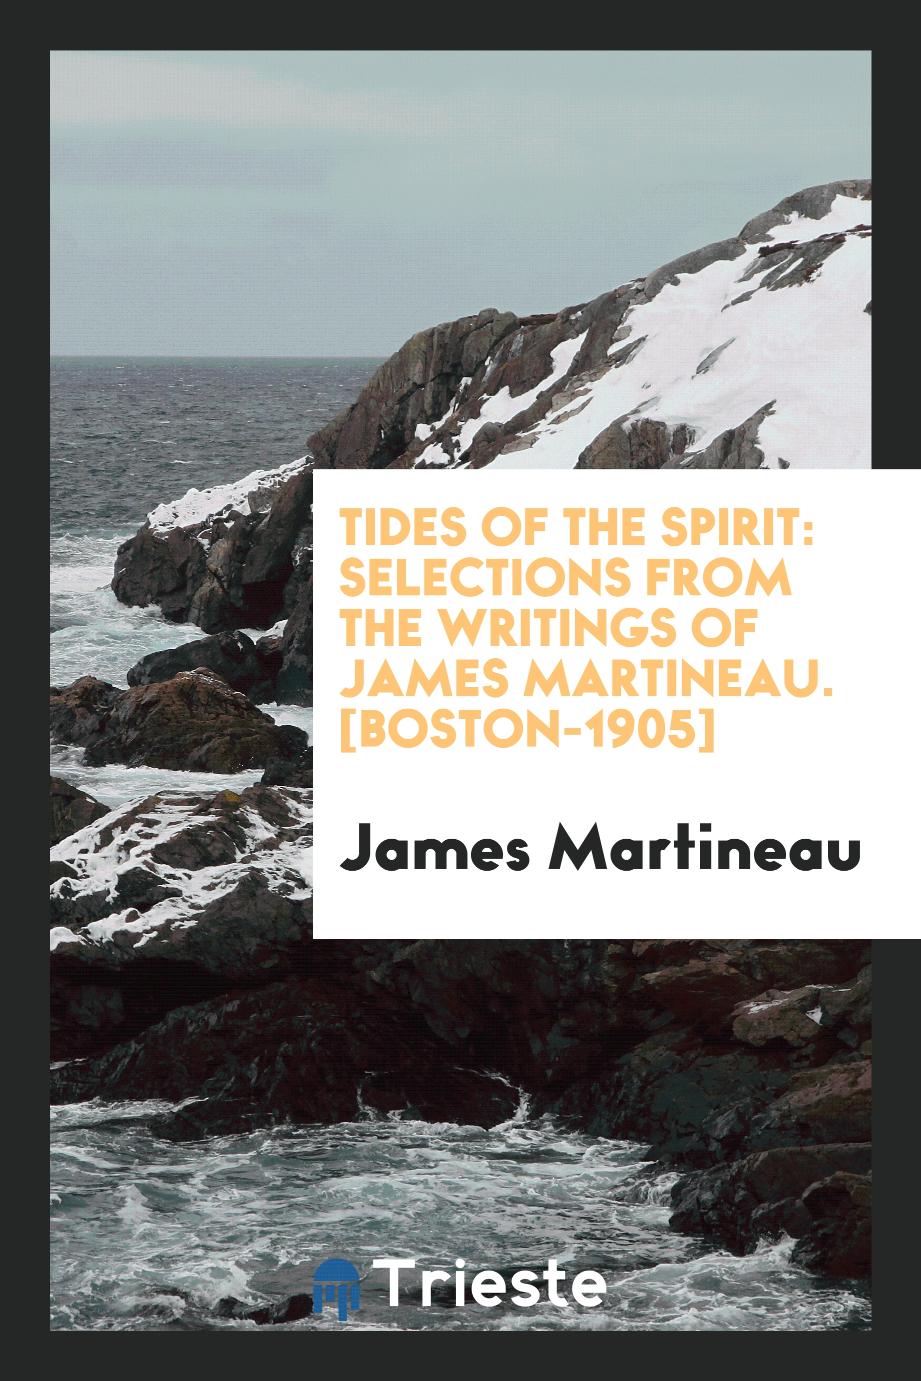 Tides of the Spirit: Selections from the Writings of James Martineau. [Boston-1905]